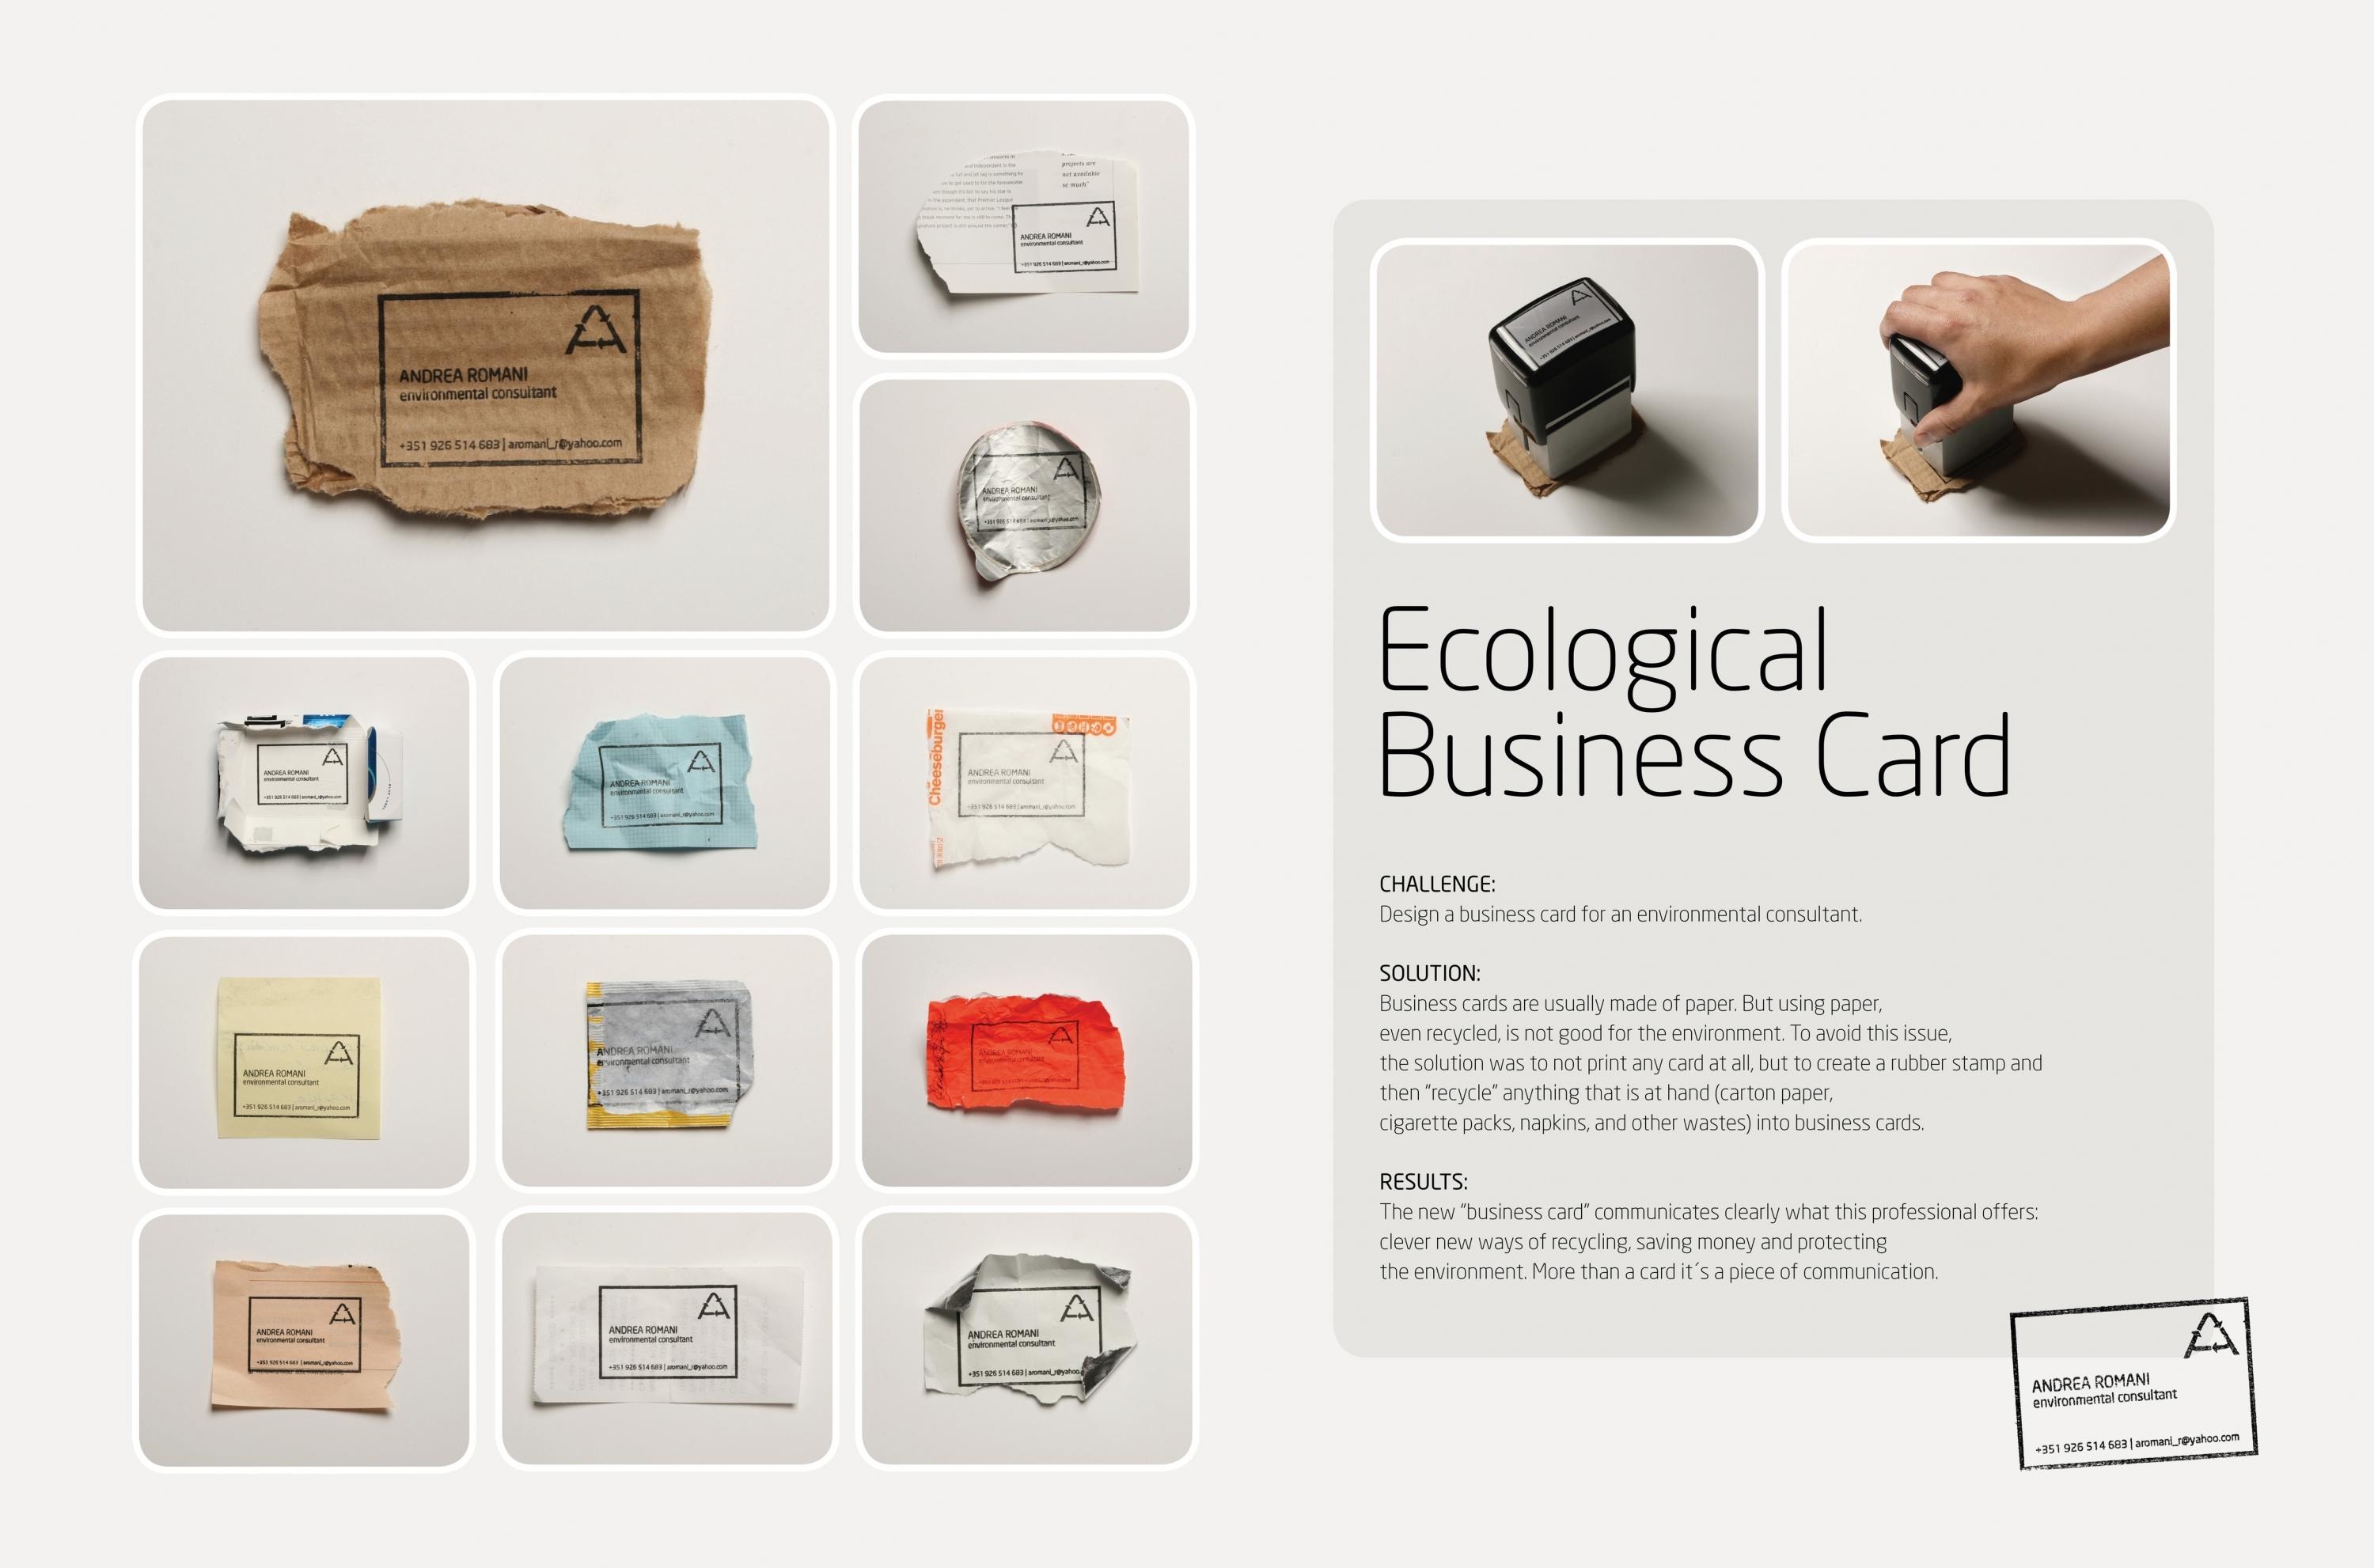 ECOLOGICAL BUSINESS CARD